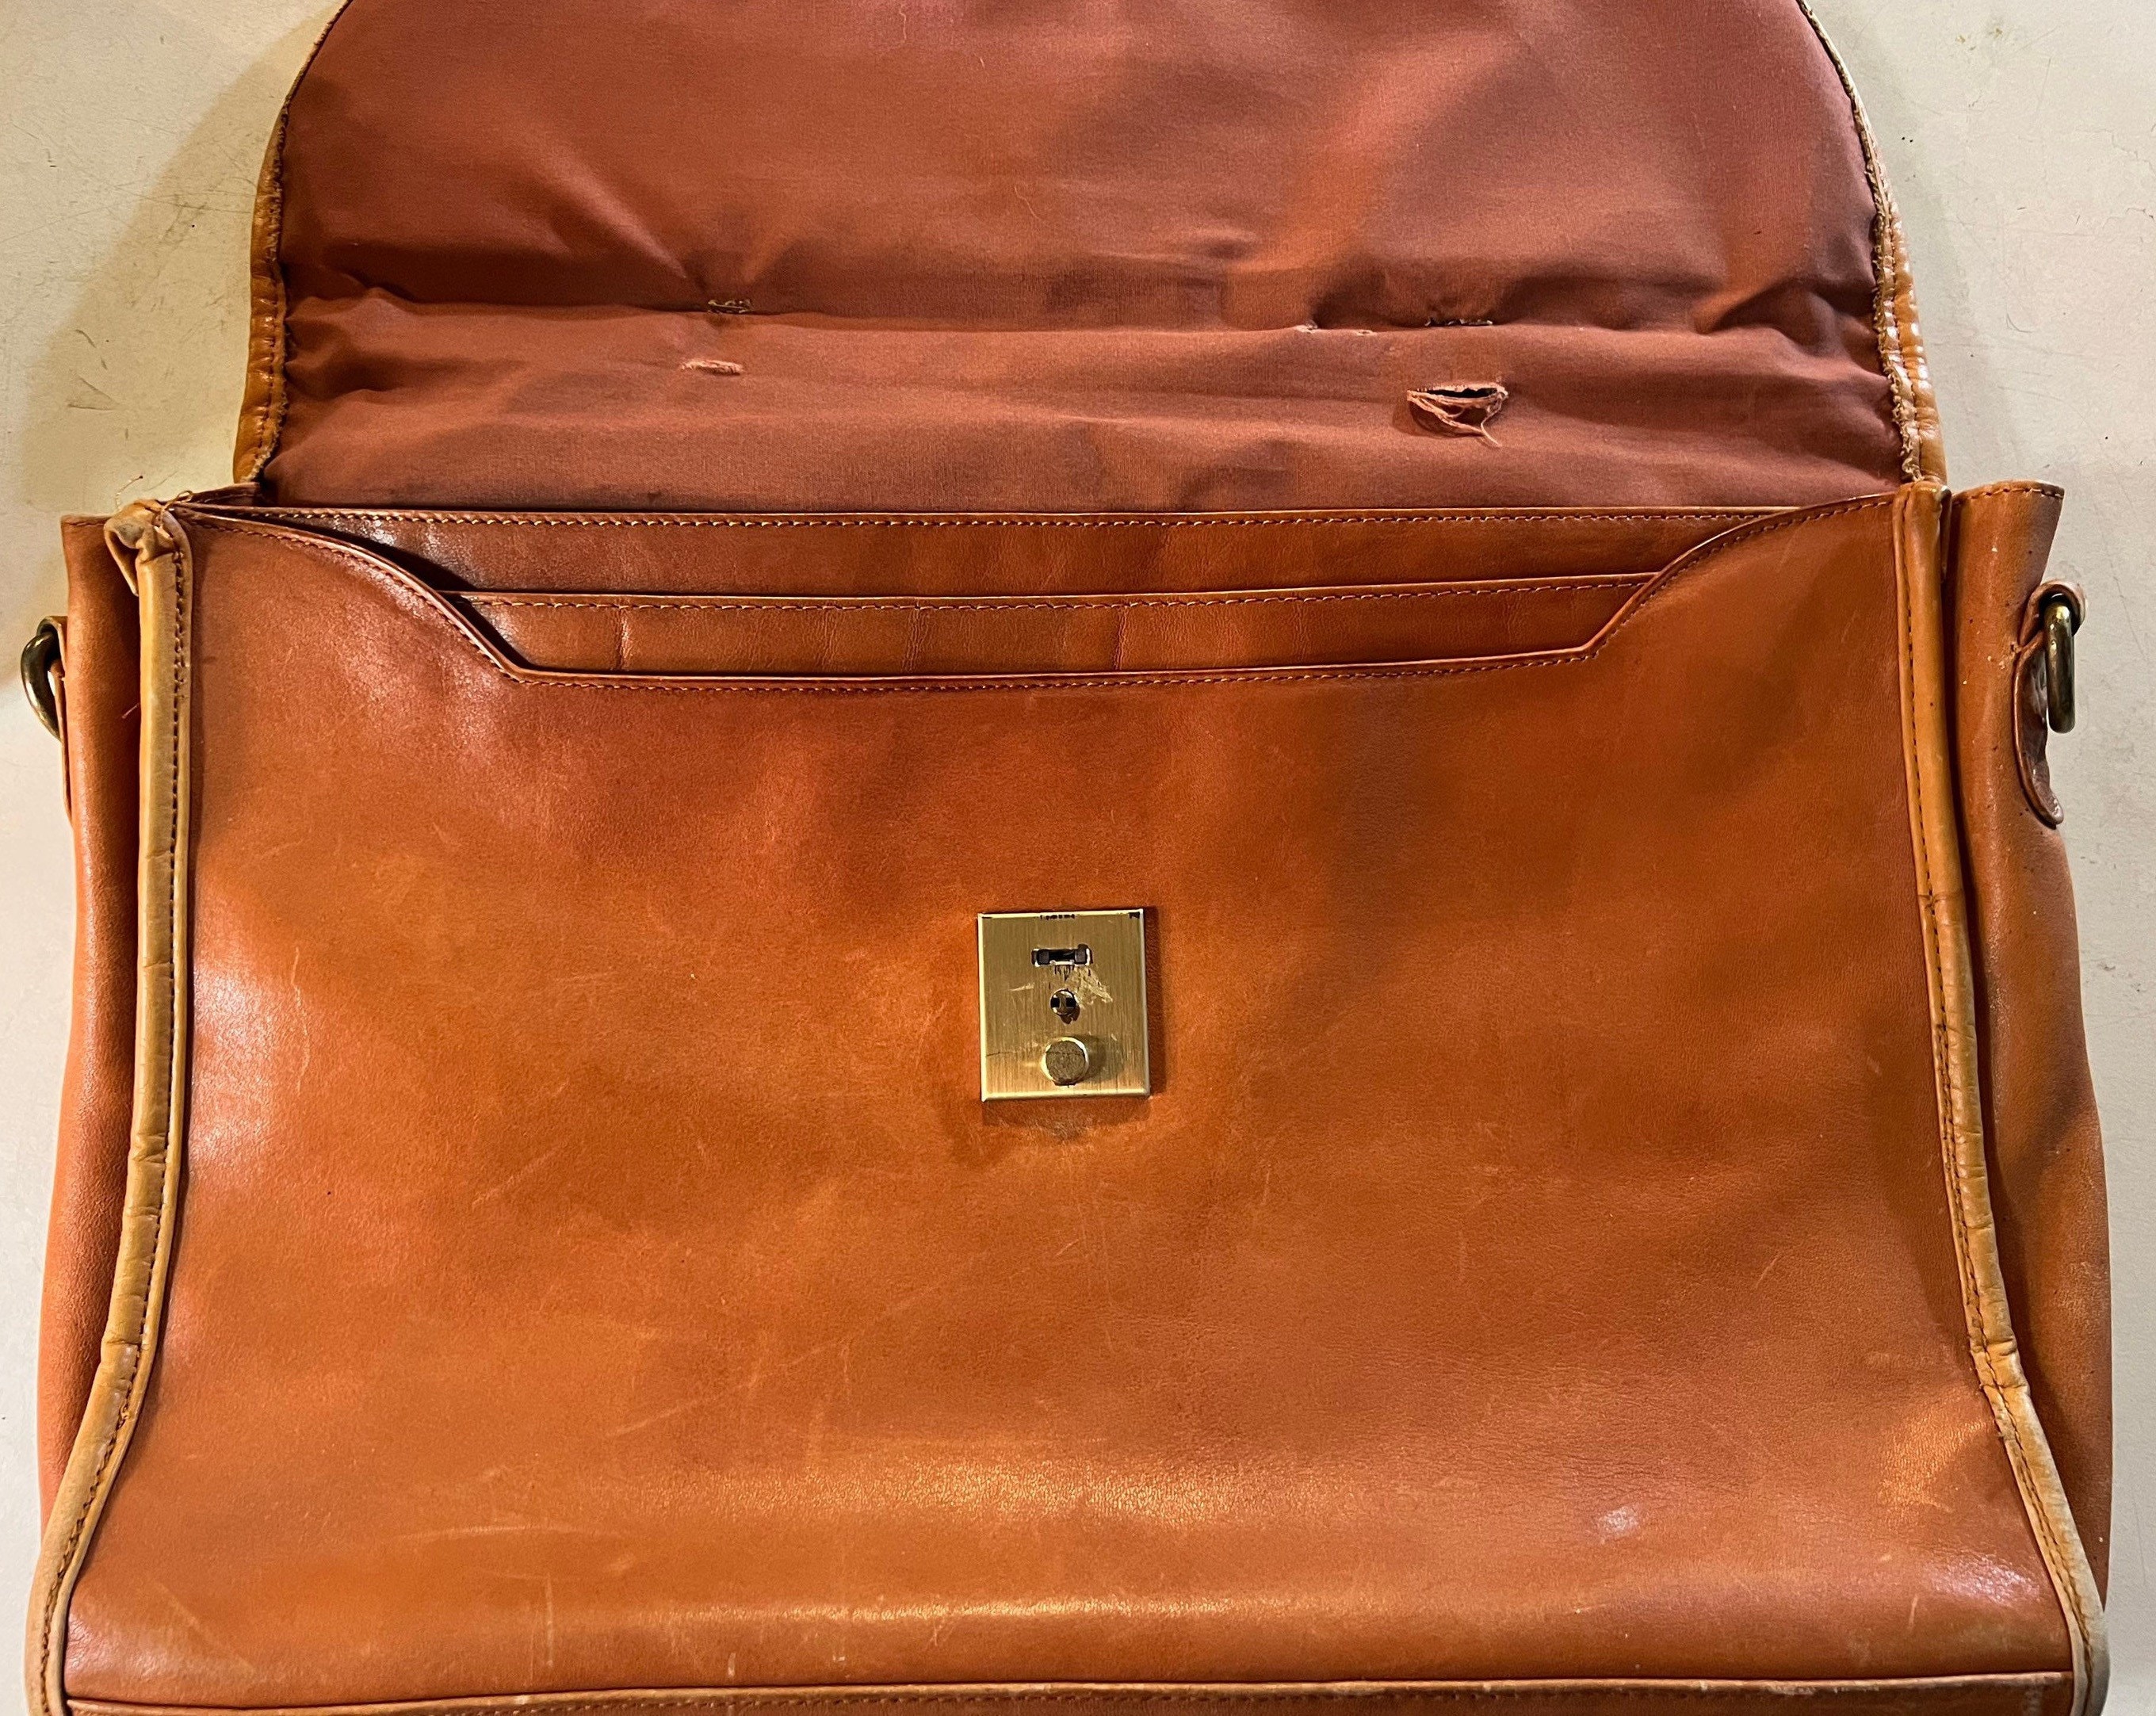 new BROOKS BROTHERS leather purse CROSS BODY satchel bag $398 MSRP